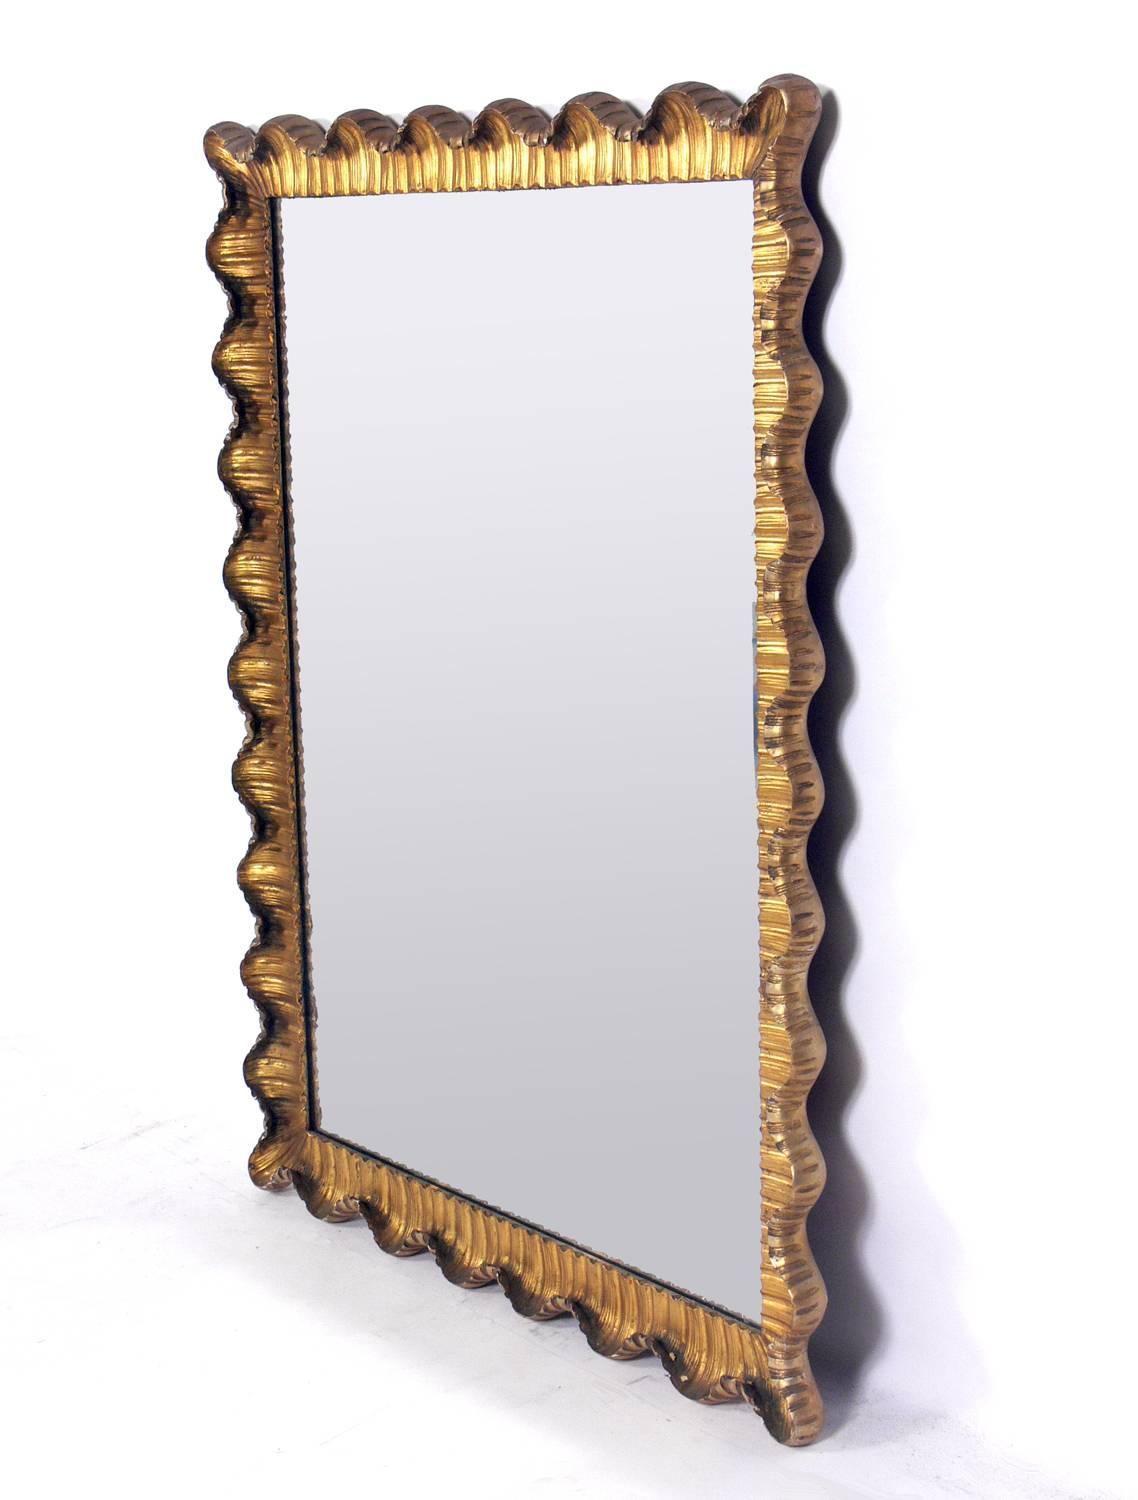 Venetian scalloped mirror, Italy, circa 1950s. Gold leaf gilt in the front and silver leaf gilt on the sides and back of the frame. Undulating curves of hand-carved and giltwood and gesso give this mirror its elegant form. The original gilt finish